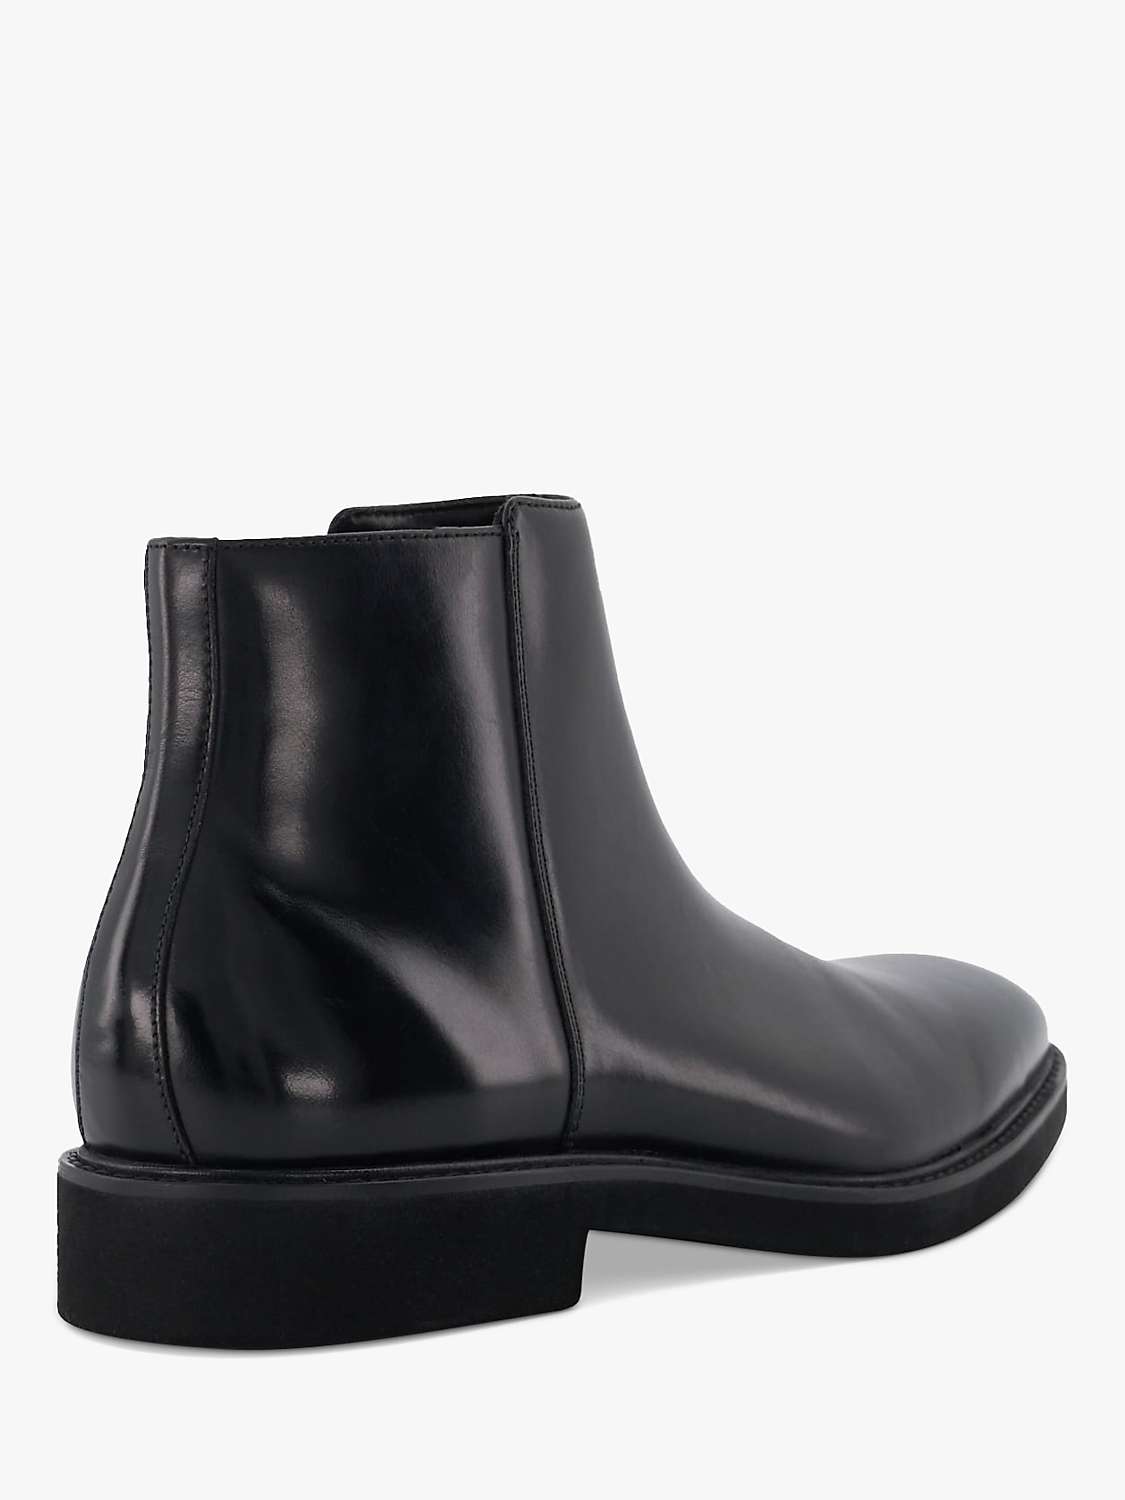 Buy Dune Mccoy Chunky Sole Boots, Black Online at johnlewis.com